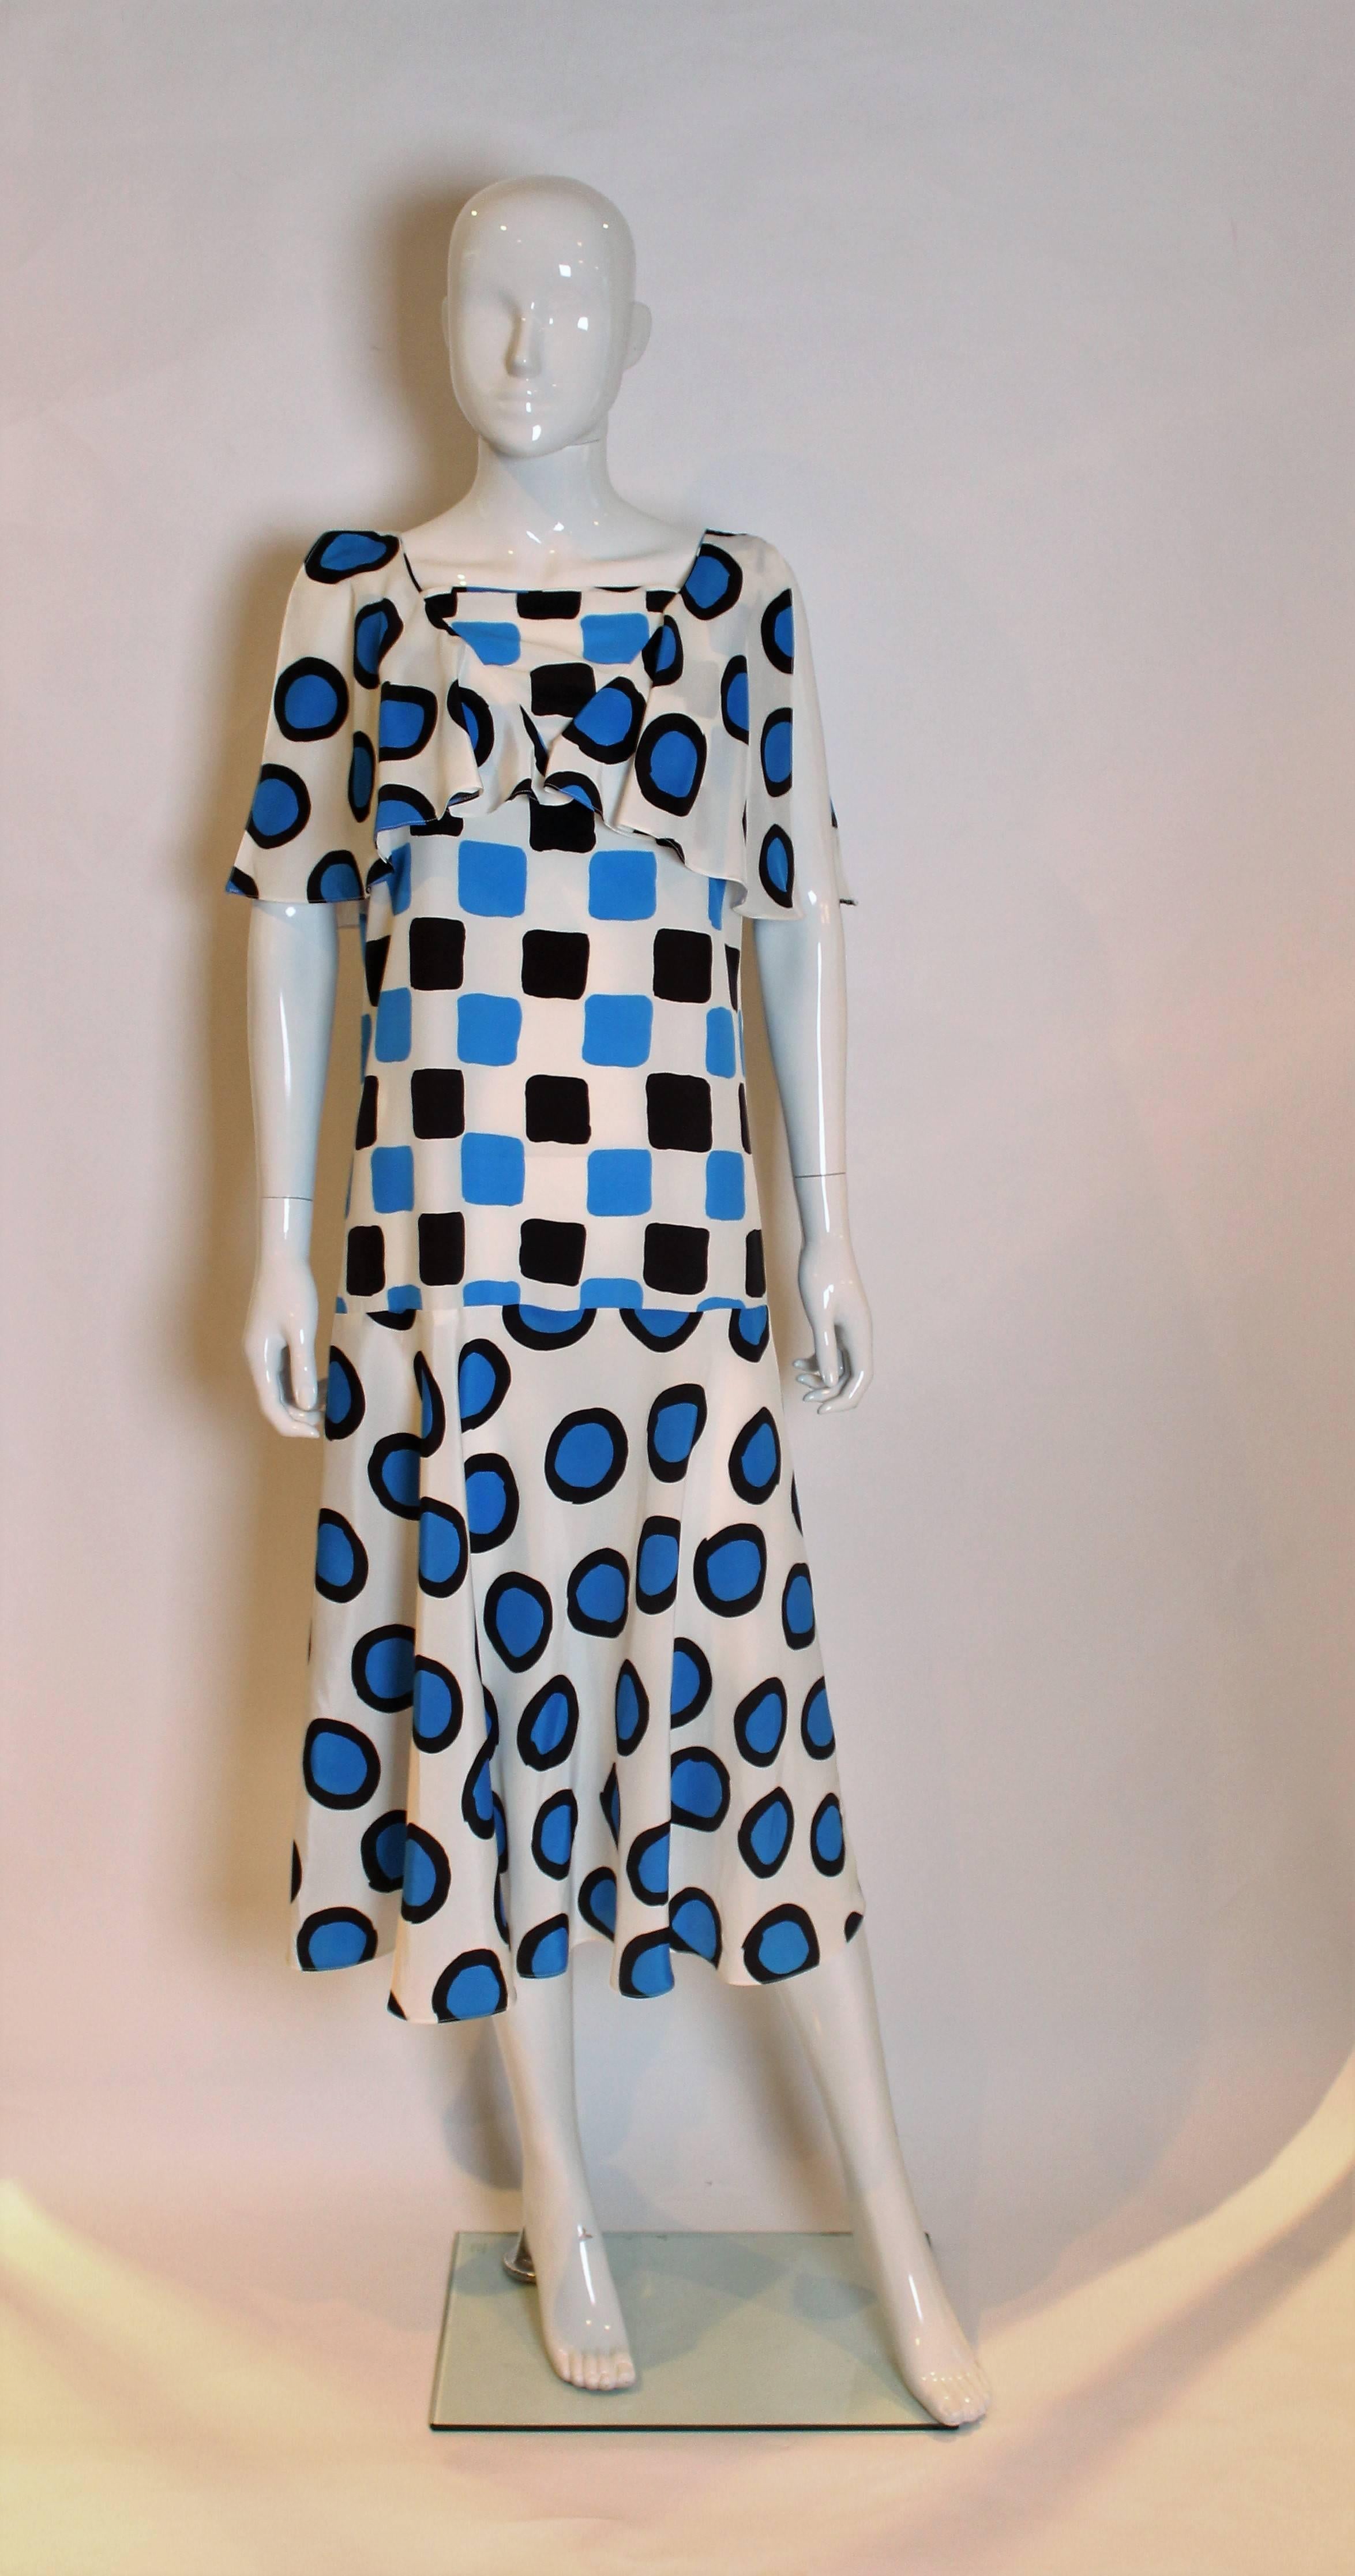 A chic silk mix dress by Christina Strambolia ( who produced the Diana revenge dress). The dress has a white background, with blue and black circles, drop waist, flared skirt and loose collar.